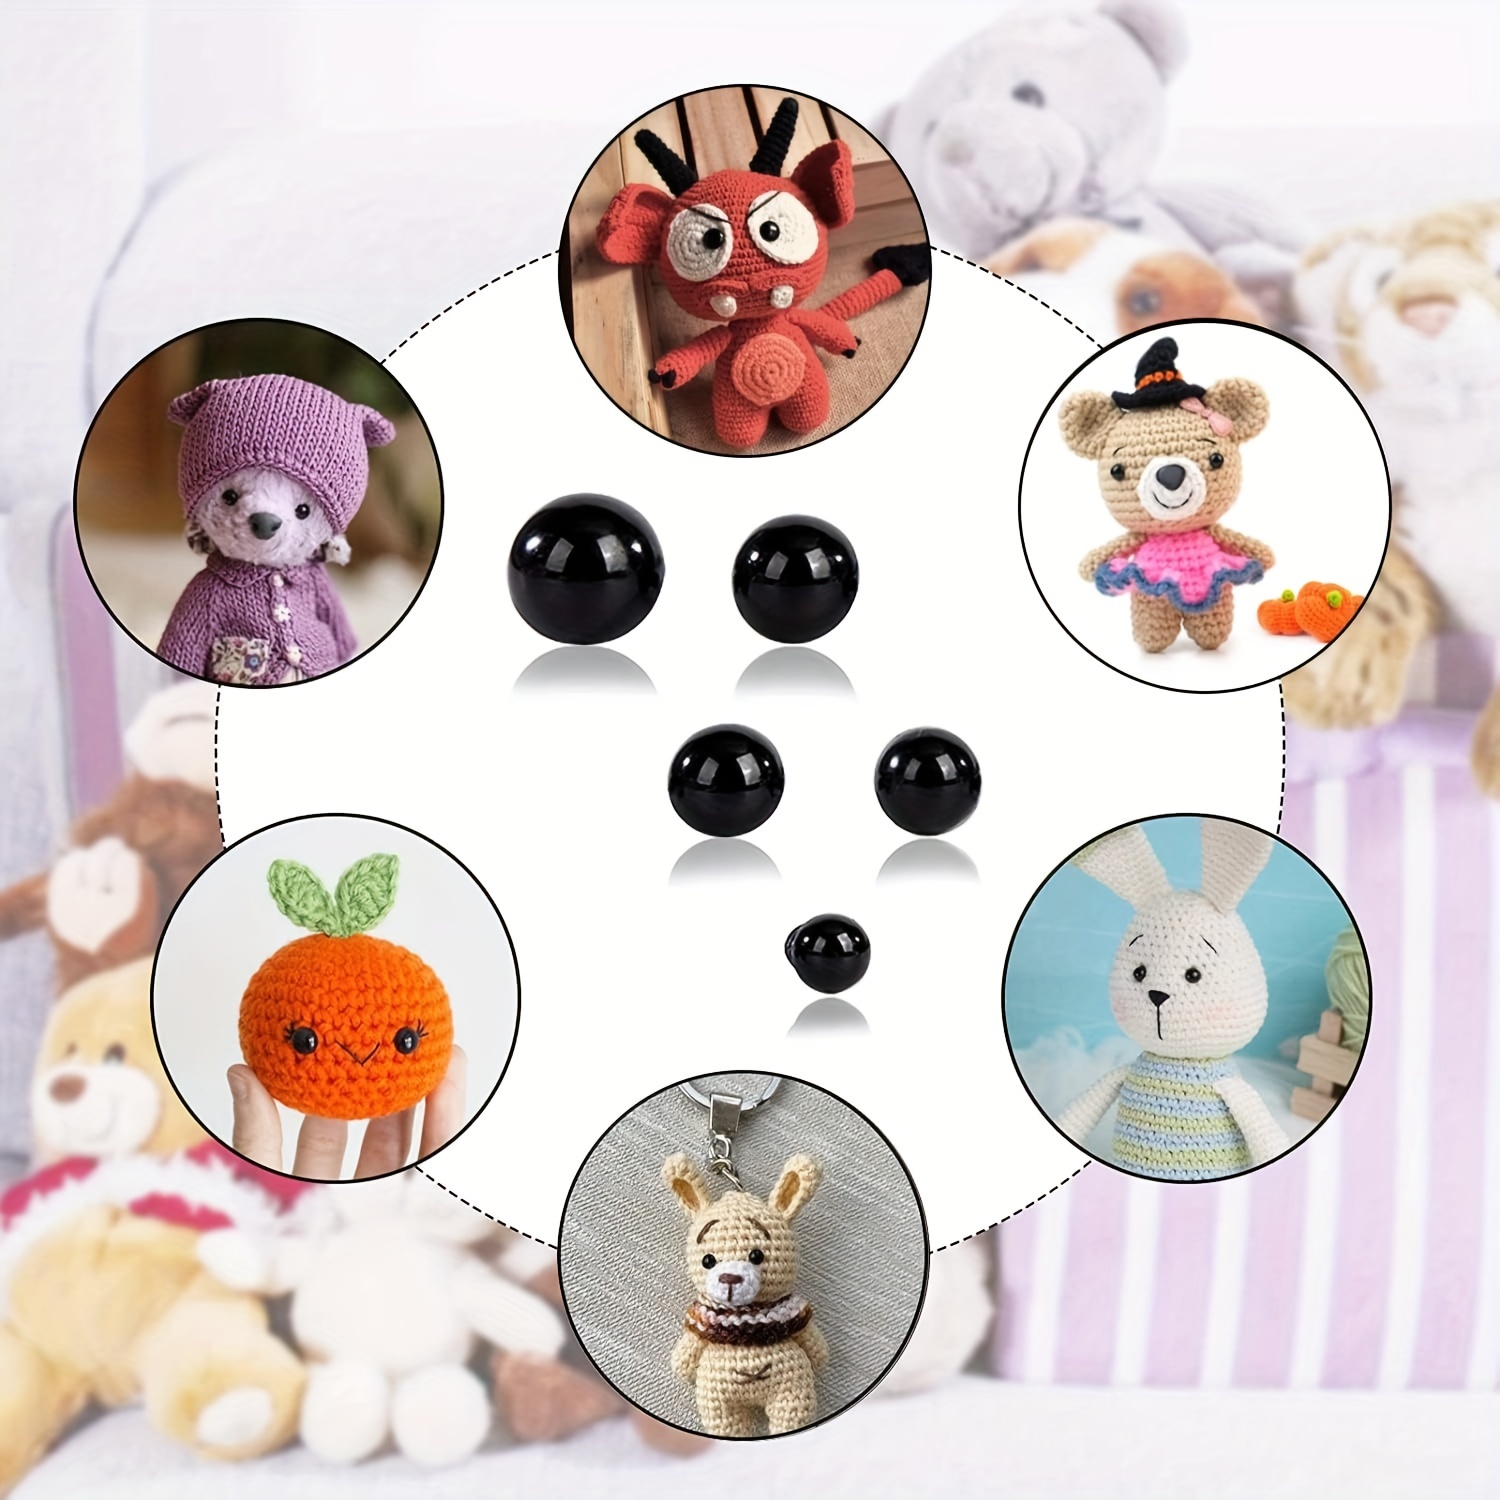 56 Pieces 16-30 Mm Large Safety Eyes for Amigurumi Stuffed Animal Eyes  Plastic Craft Crochet Eyes for DIY of Puppet, Bear, Toy Doll 